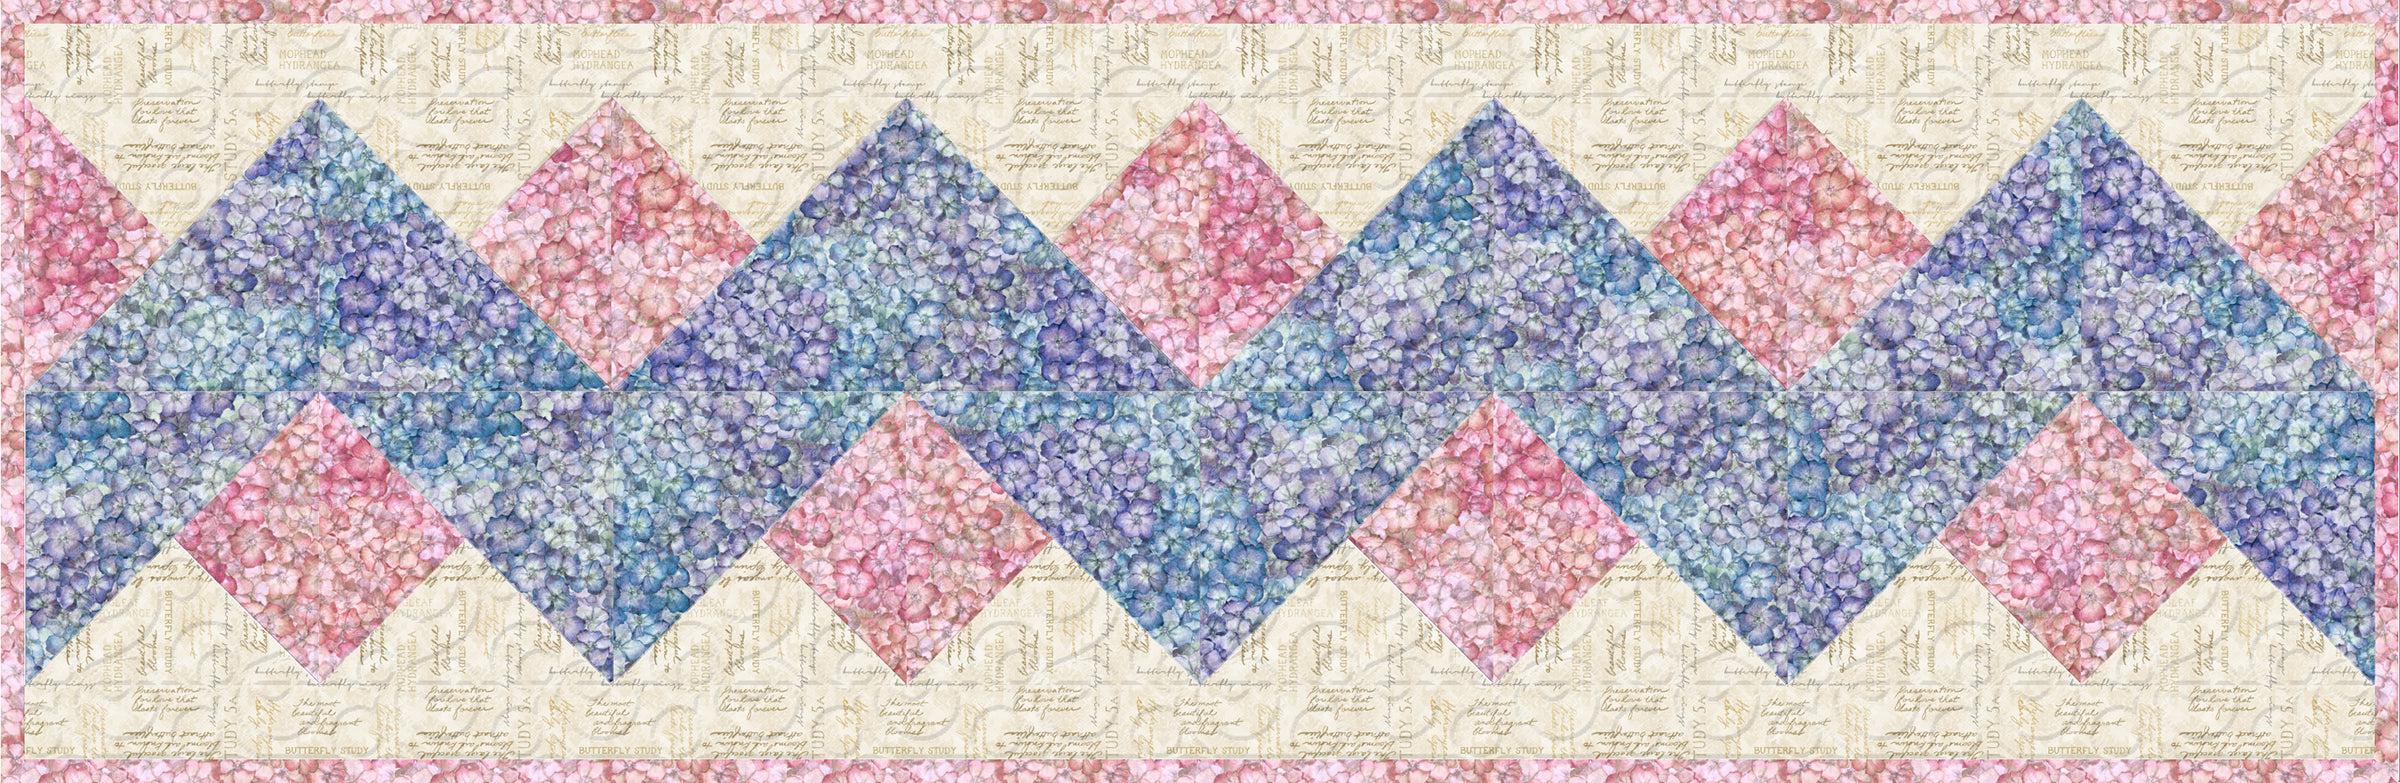 BASIC Runner #1 - Zig Zag Table Runner Project - Free Digital Download-Wilmington Prints-My Favorite Quilt Store